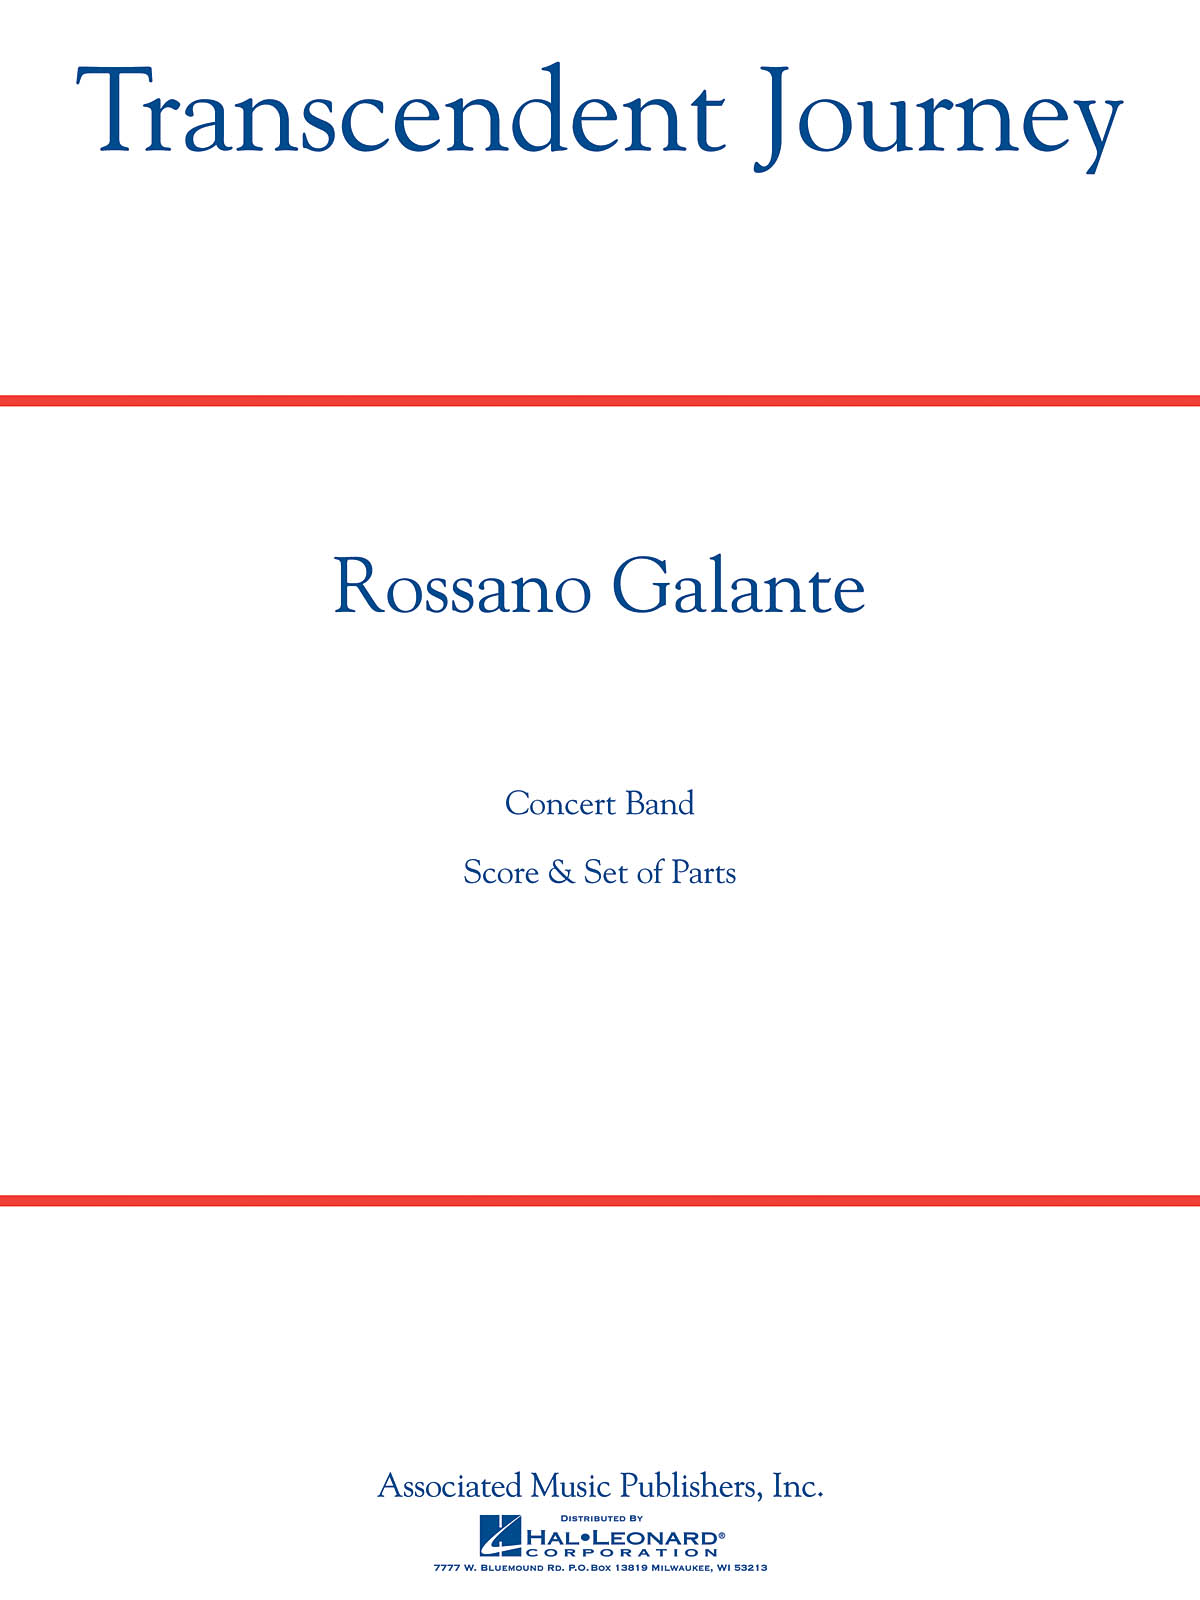 Rossano Galante: Transcendent Journey: Concert Band: Score and Parts